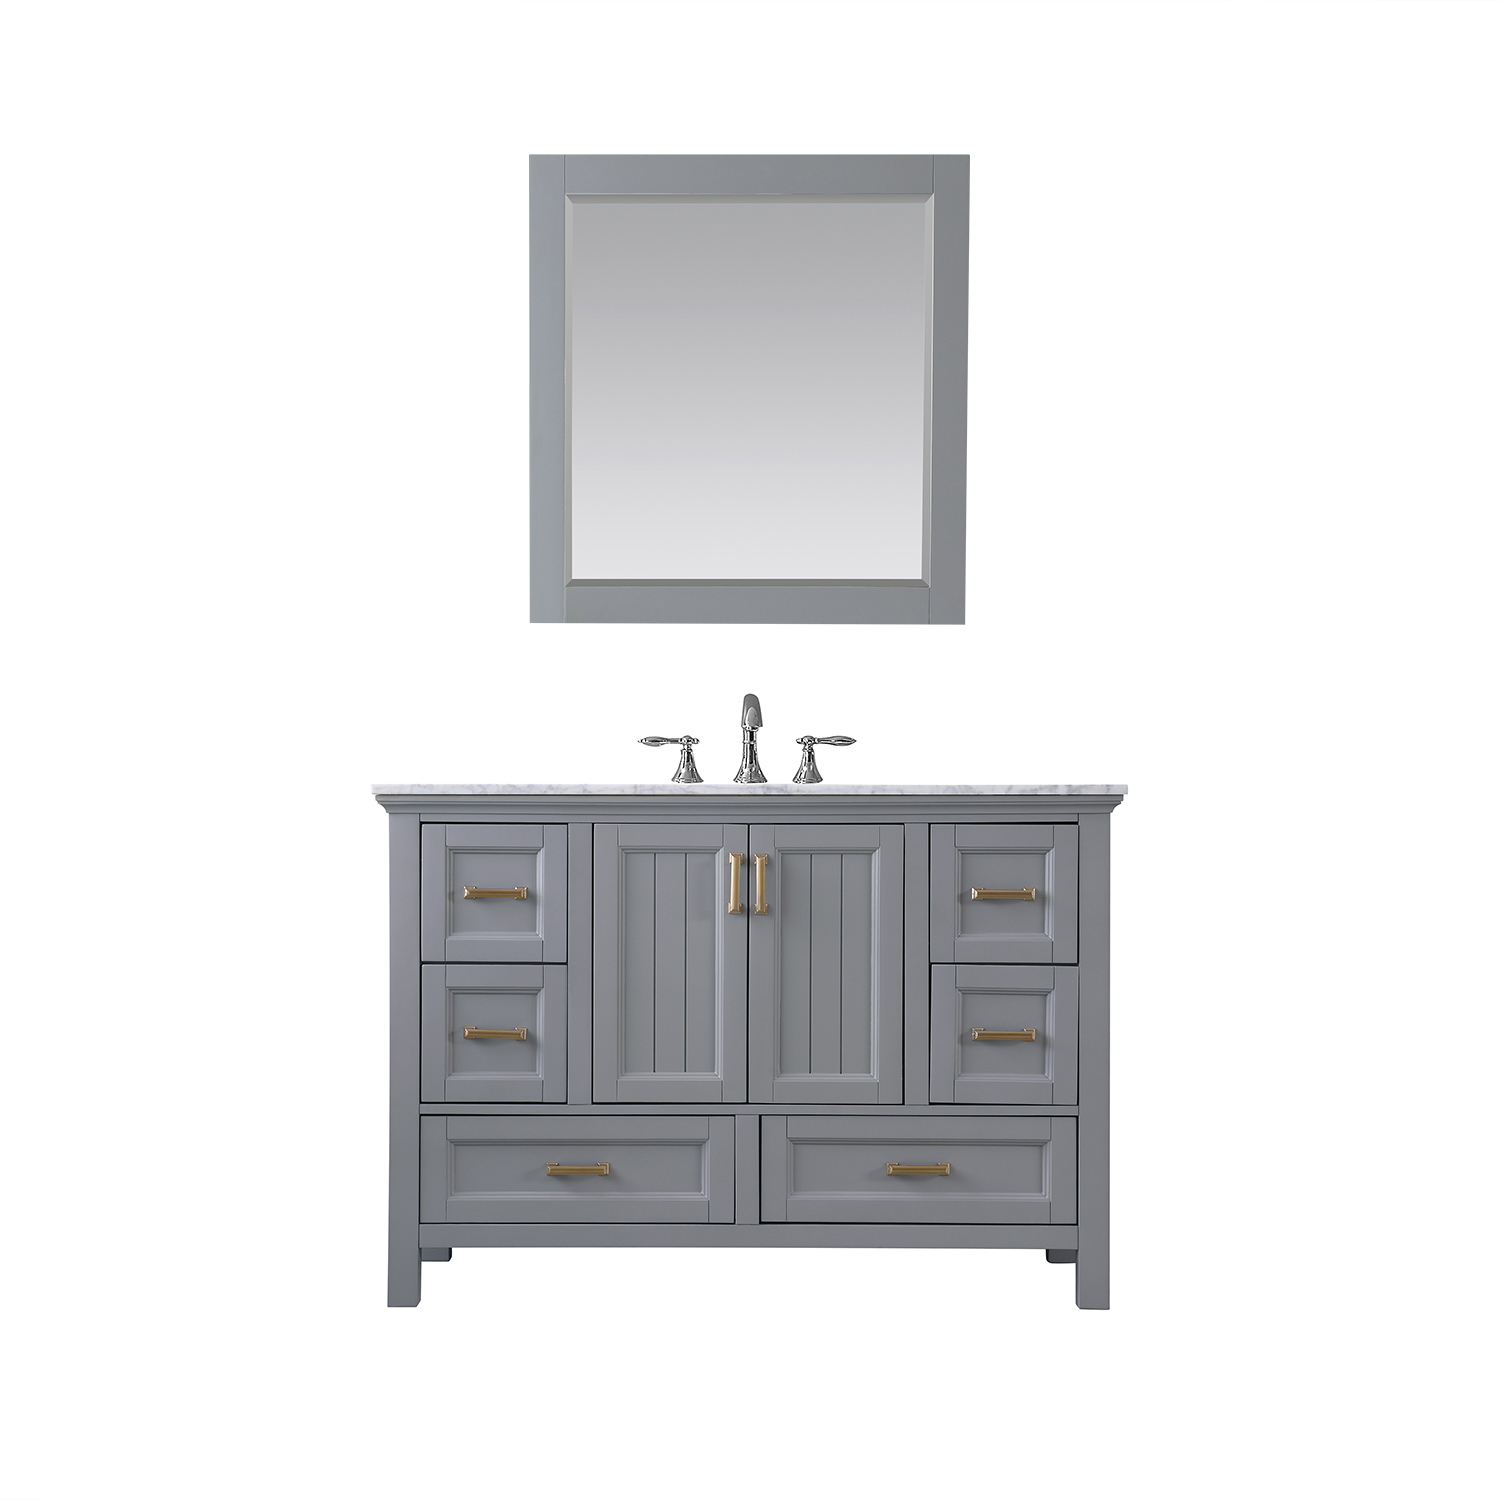 Issac Edwards Collection 48" Single Bathroom Vanity Set in Gray and Carrara White Marble Countertop without Mirror 